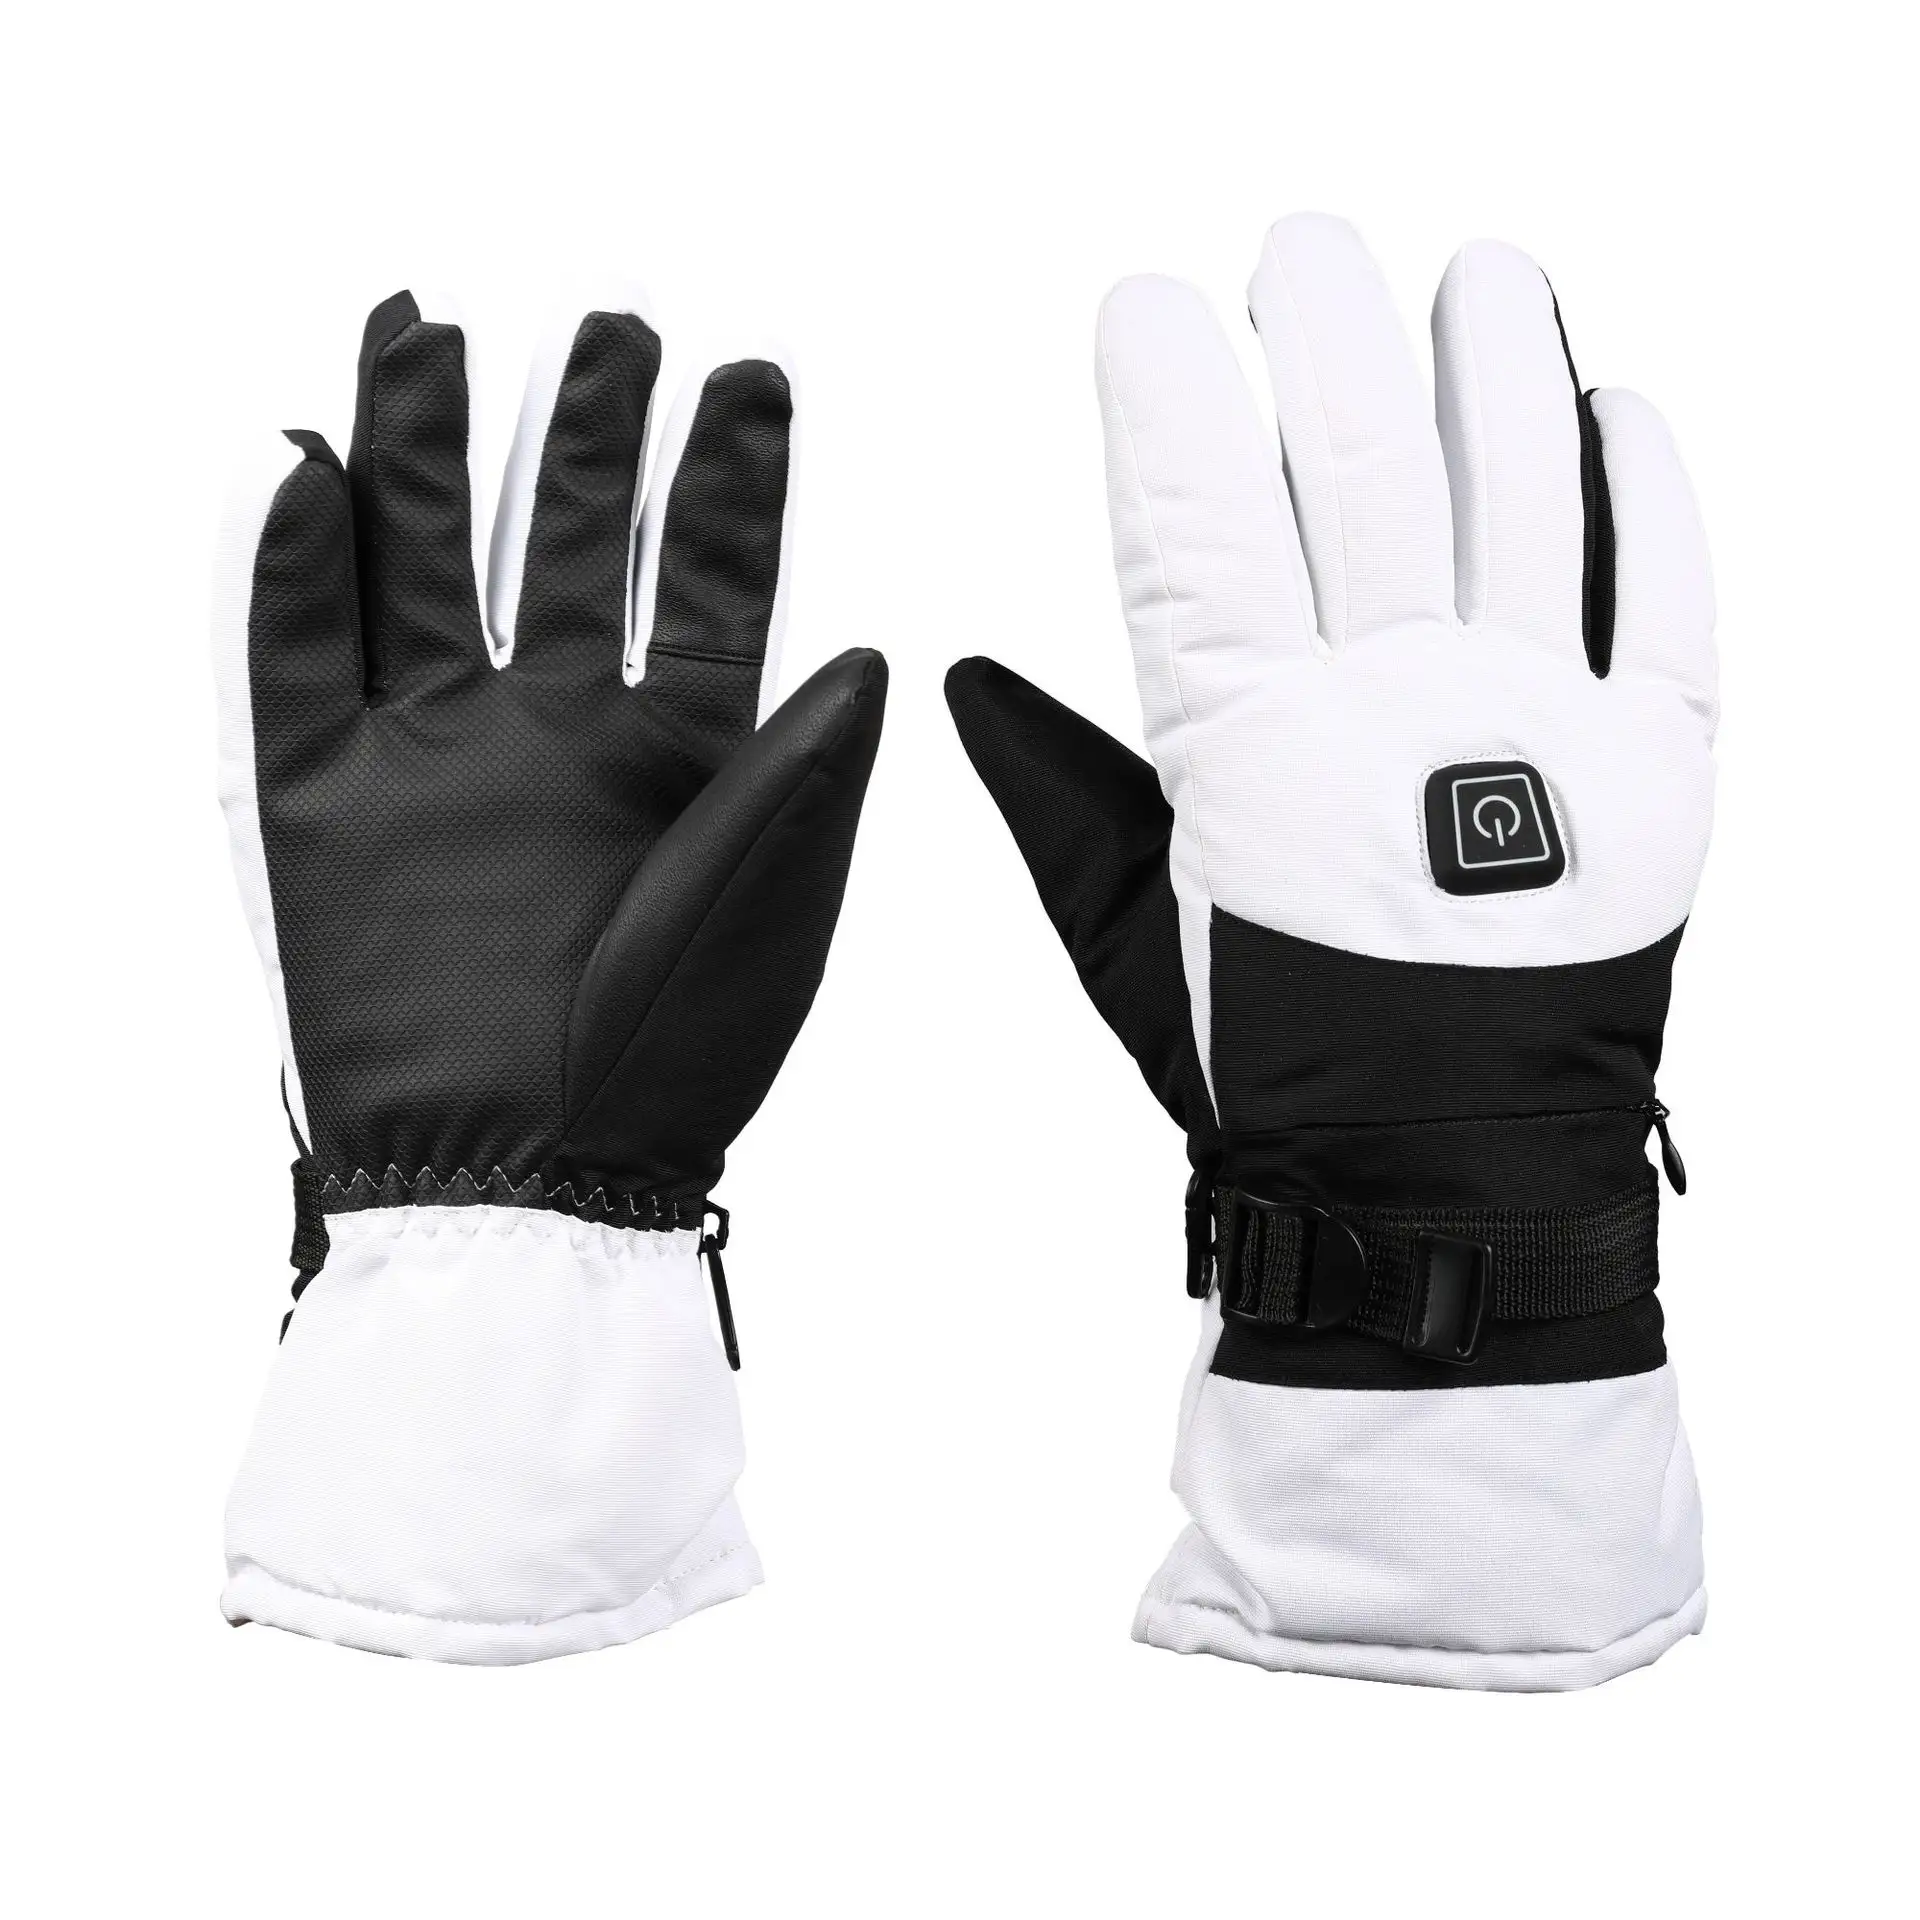 Waterproof Winter Warm Touch Screen Gloves Bicycle Gloves Skiing Windproof Cycling Heated Motorcycle Gloves